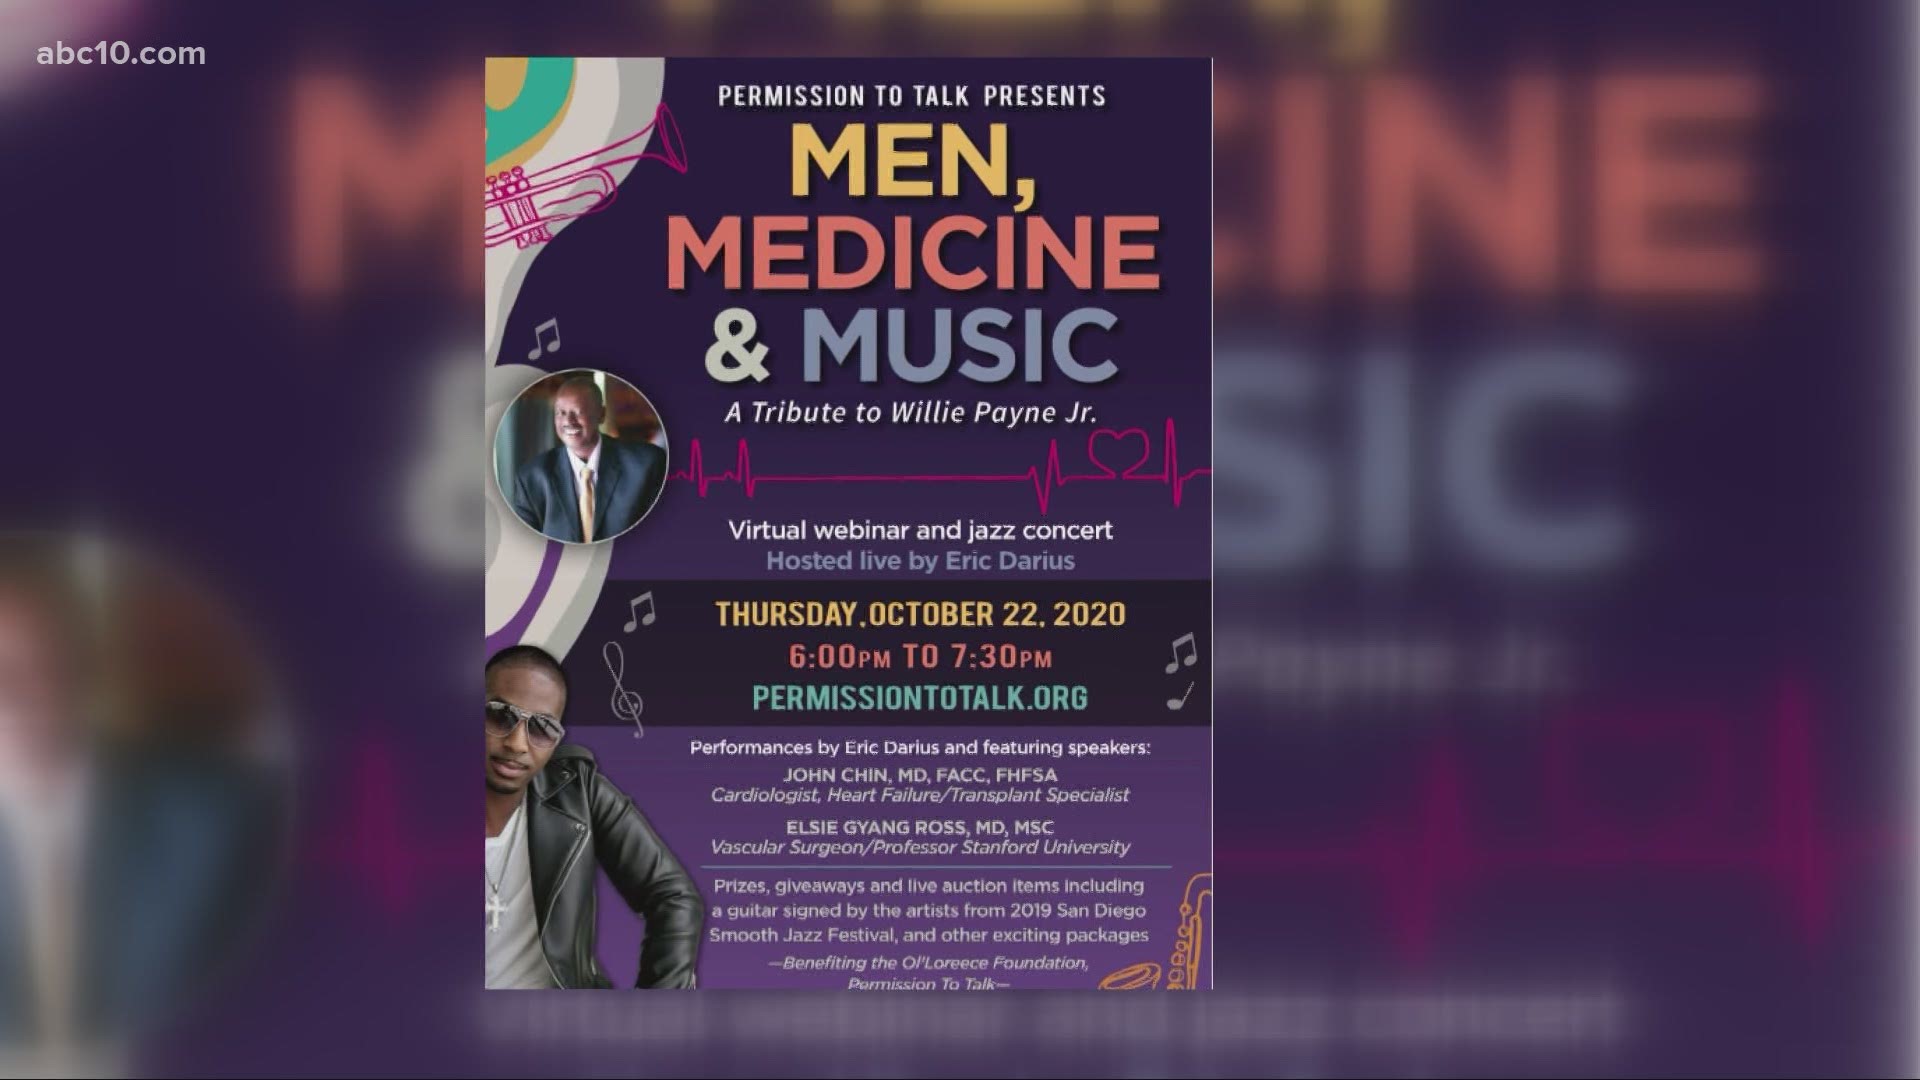 A virtual Sacramento event focuses on getting men talking to doctors about their health to spot issues early.